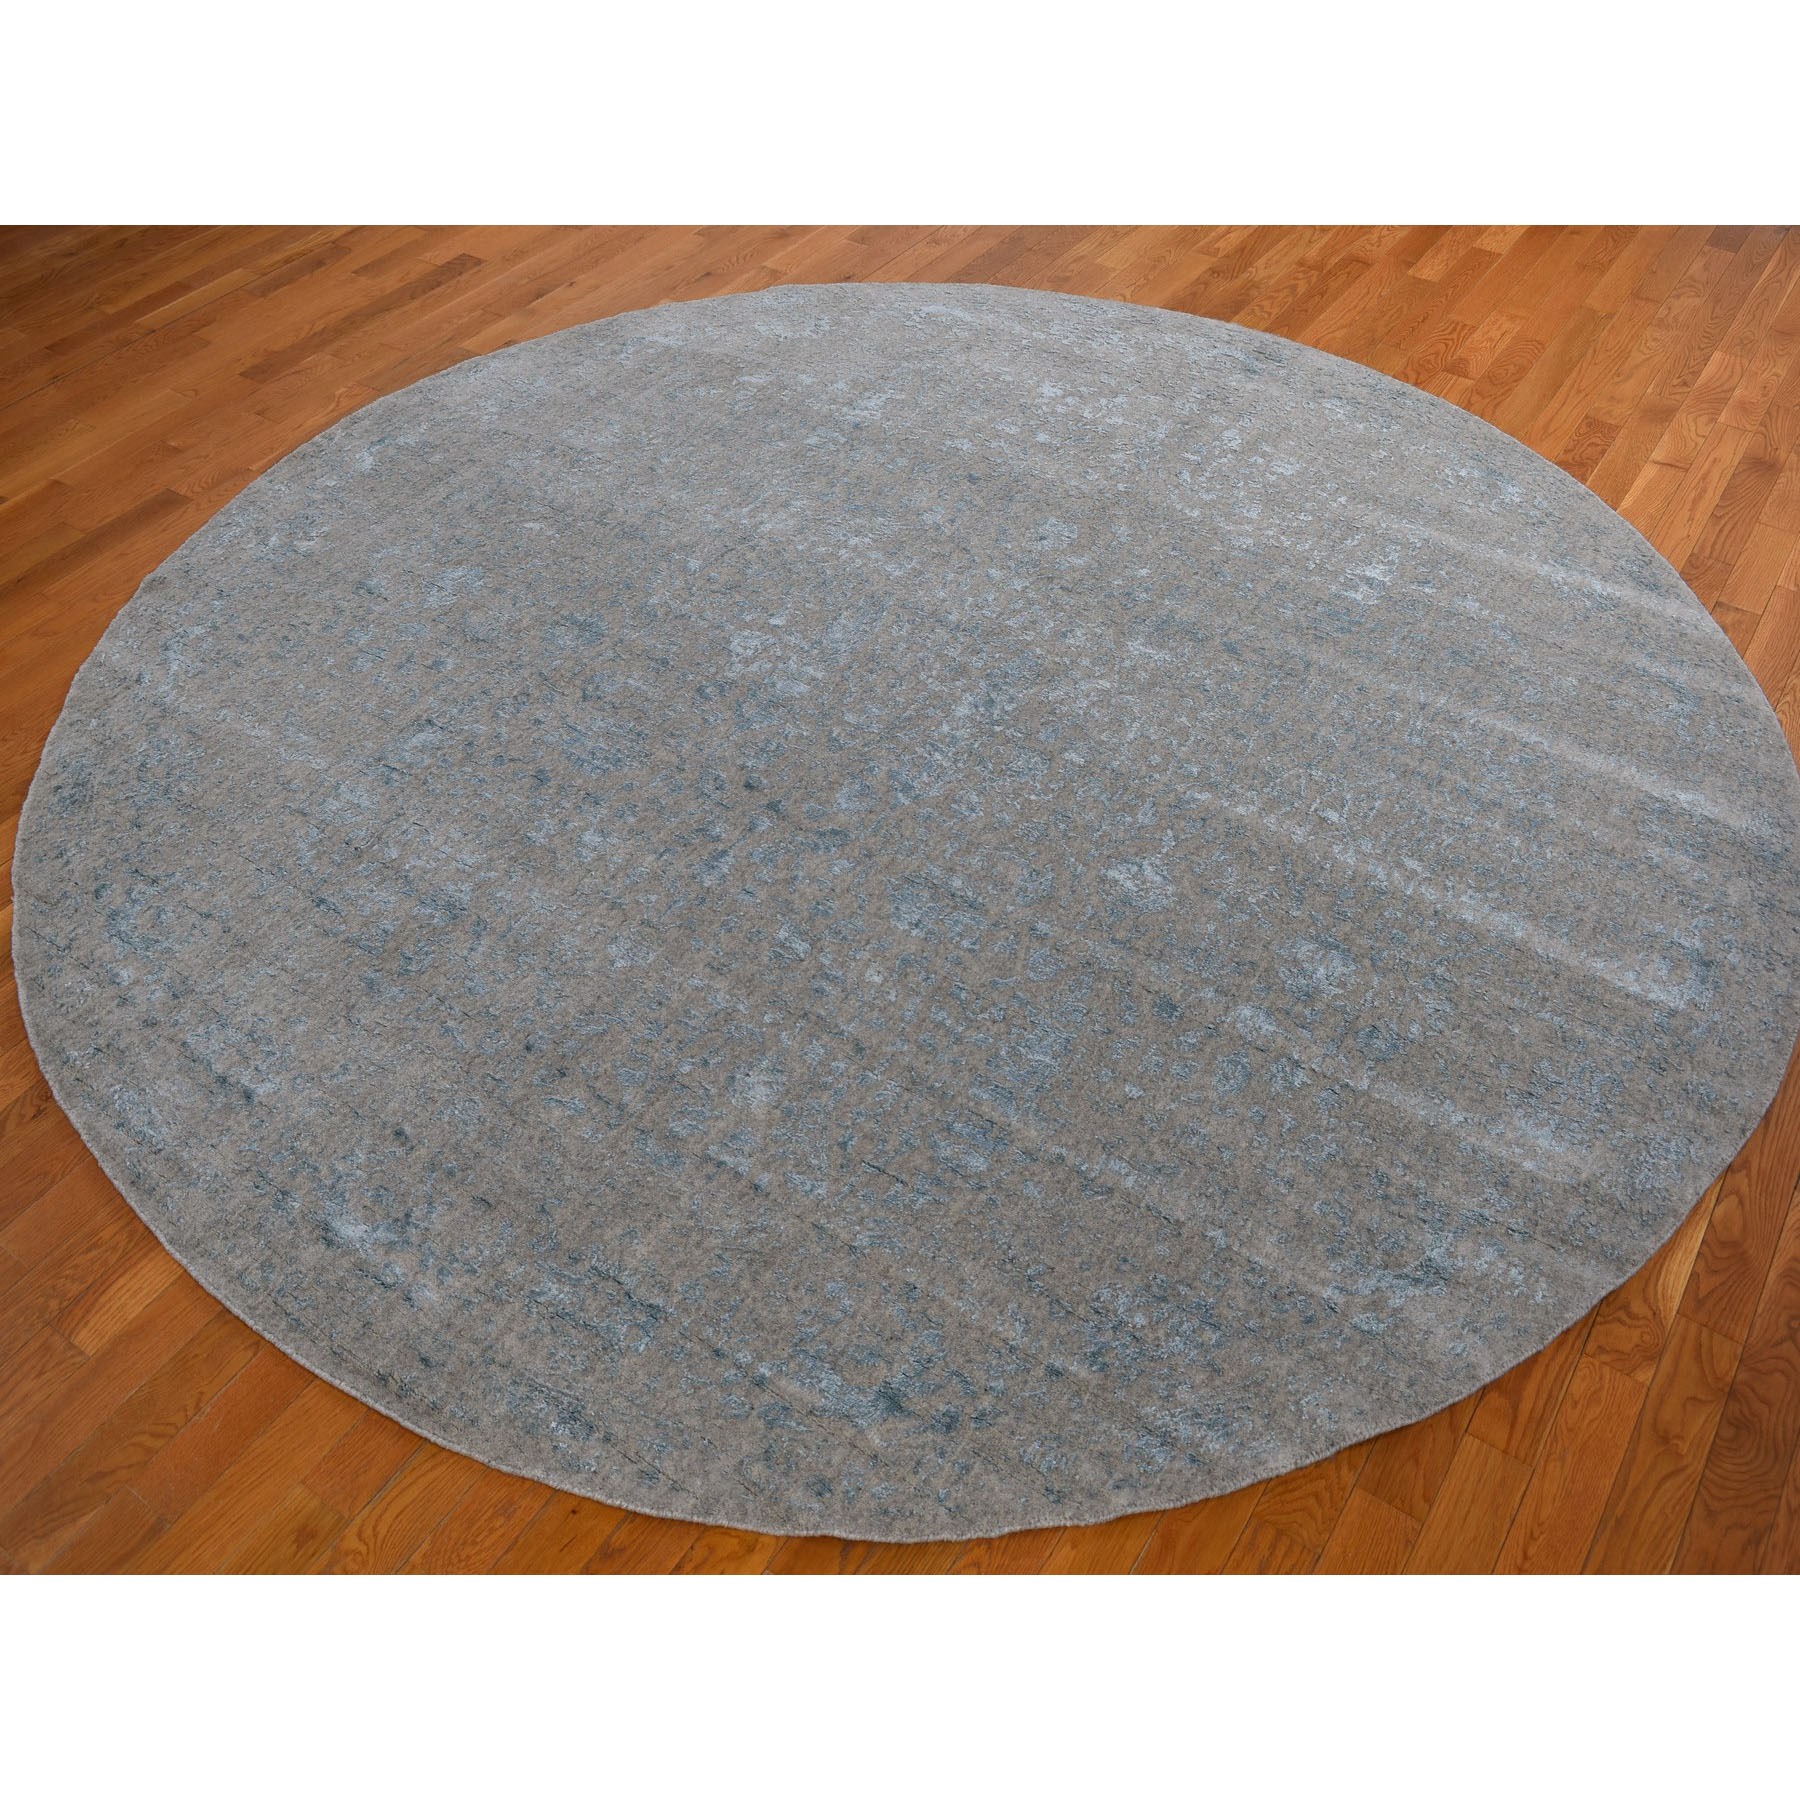 9-10 x9-10  Round Gray Broken Cypress Tree Design Wool And Silk Thick Hand Loomed Oriental Rug 